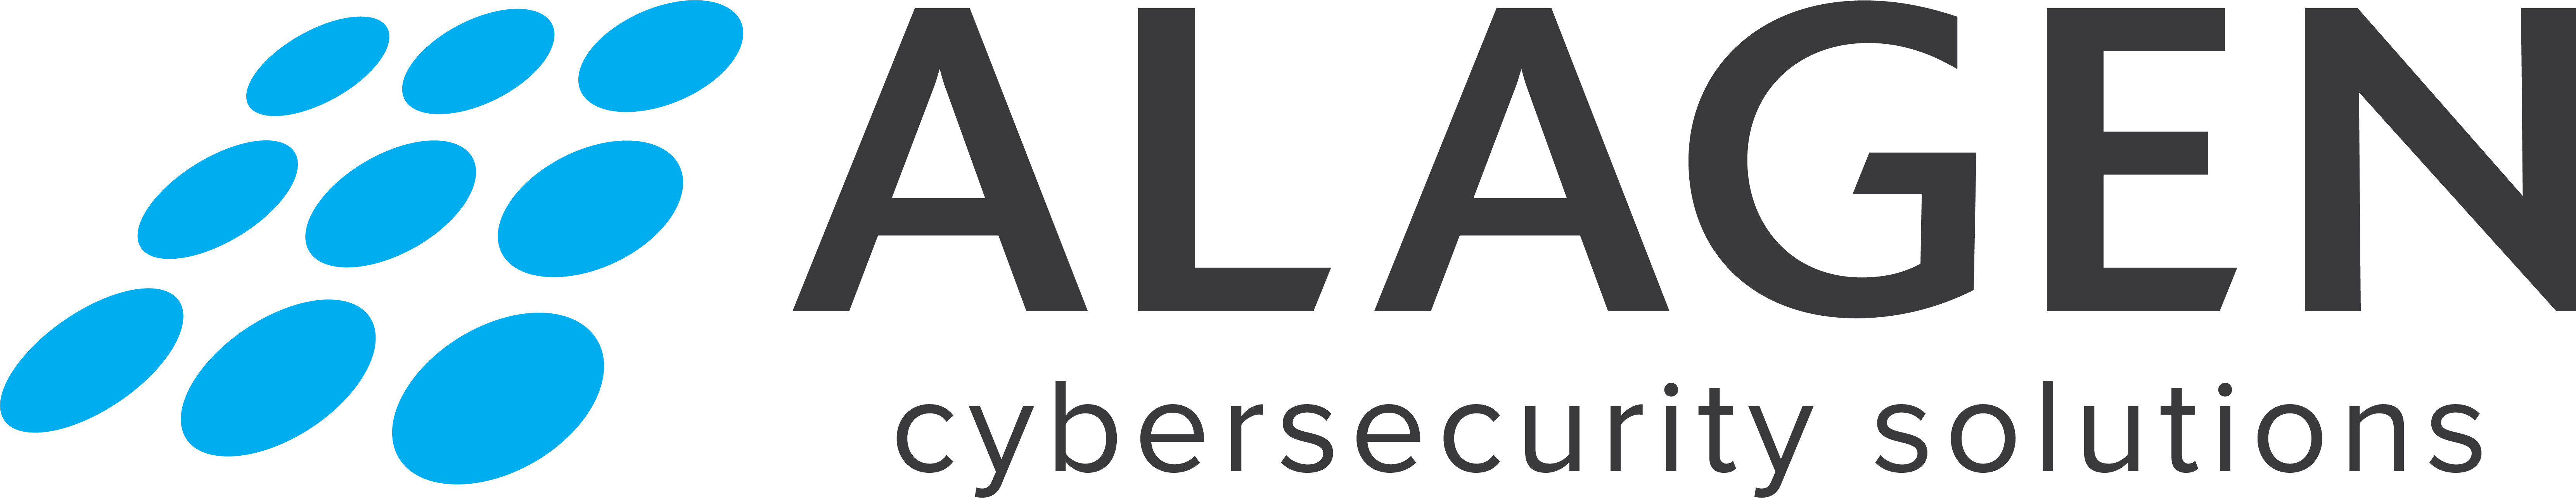 Alagen Cyber Security solutions logo